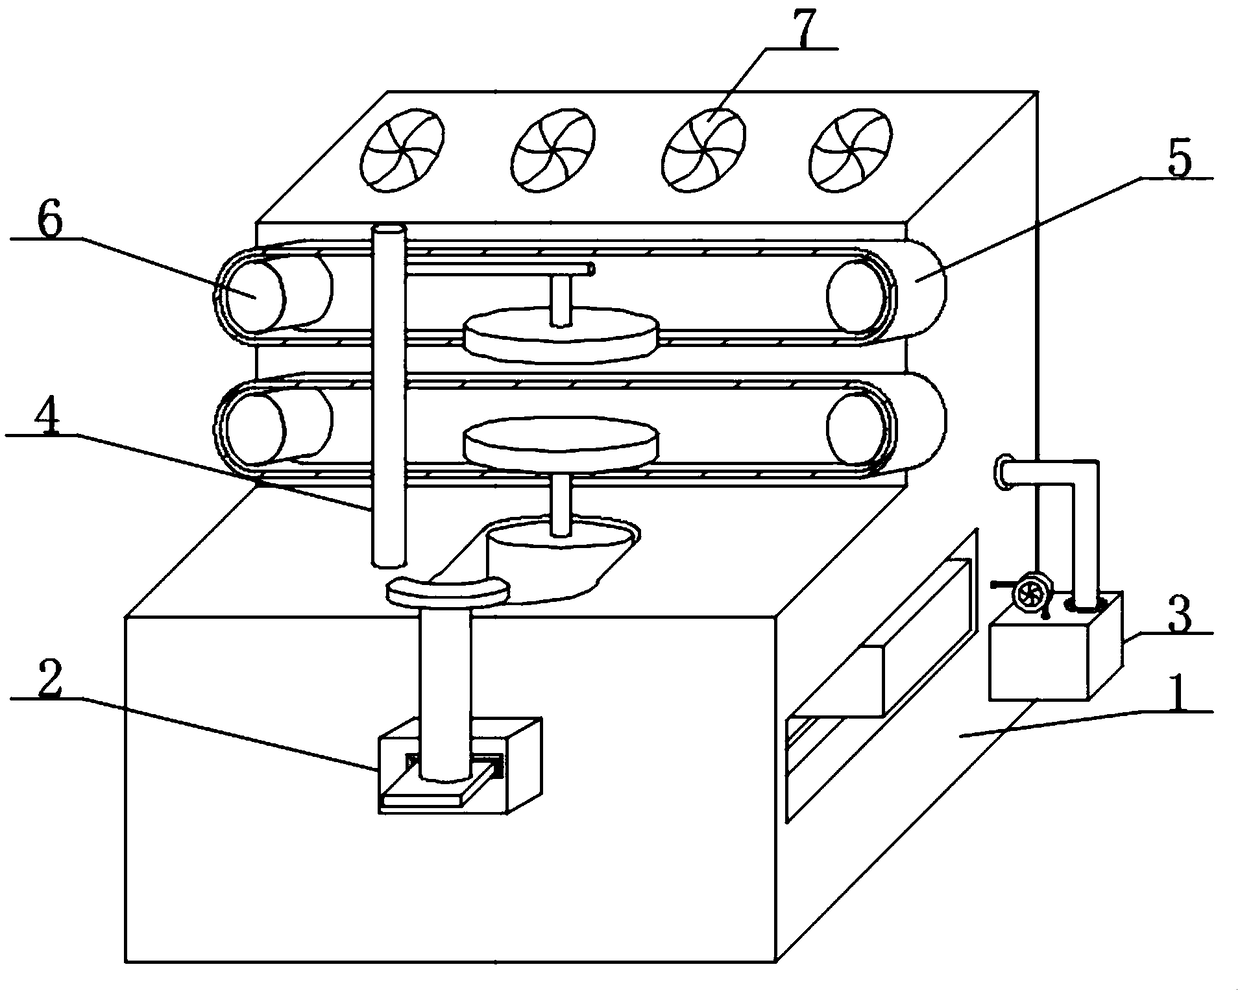 Mechanical and electrical equipment for grinding edge of glass